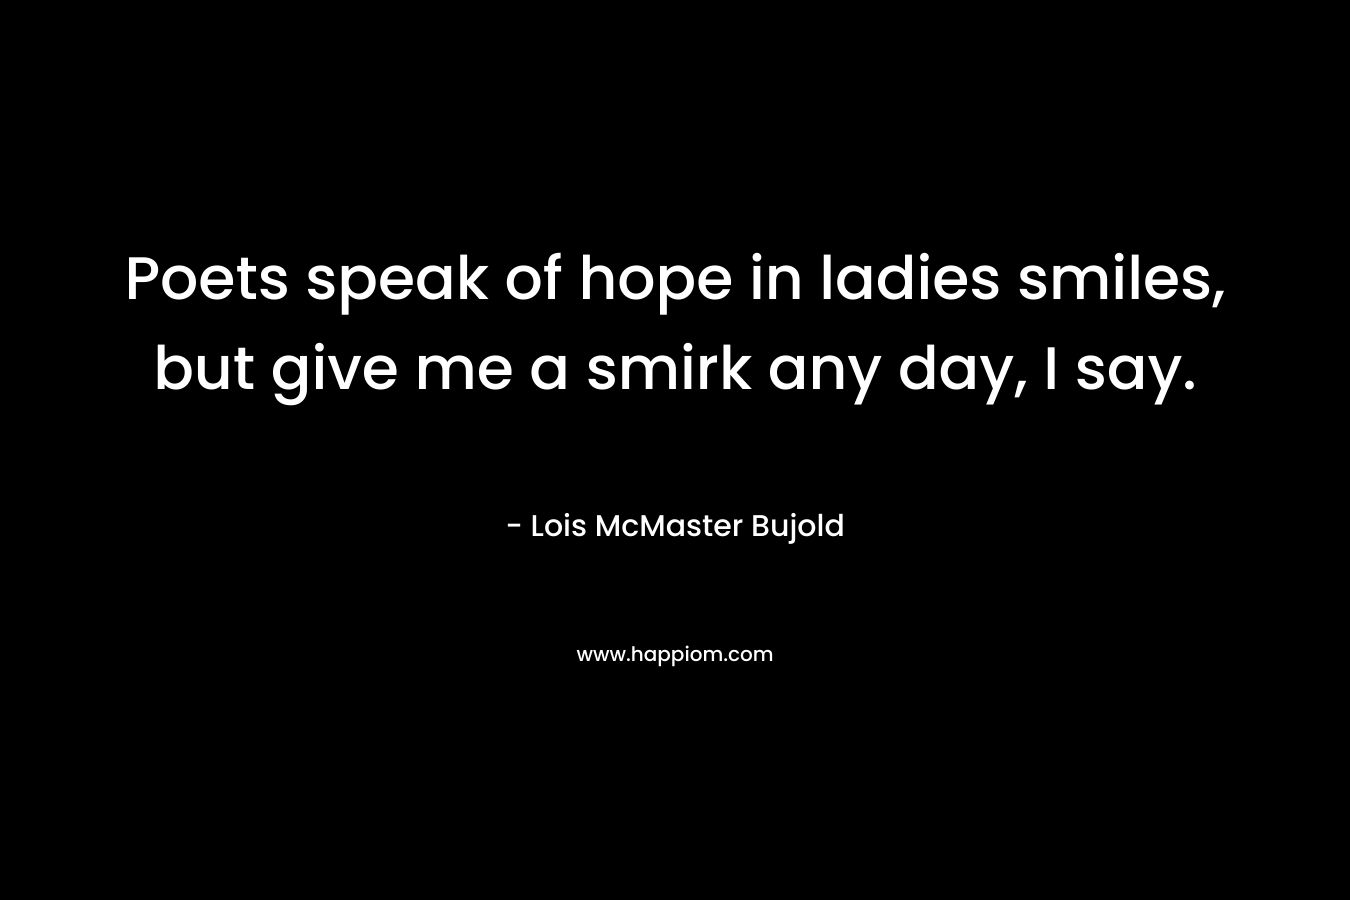 Poets speak of hope in ladies smiles, but give me a smirk any day, I say. – Lois McMaster Bujold